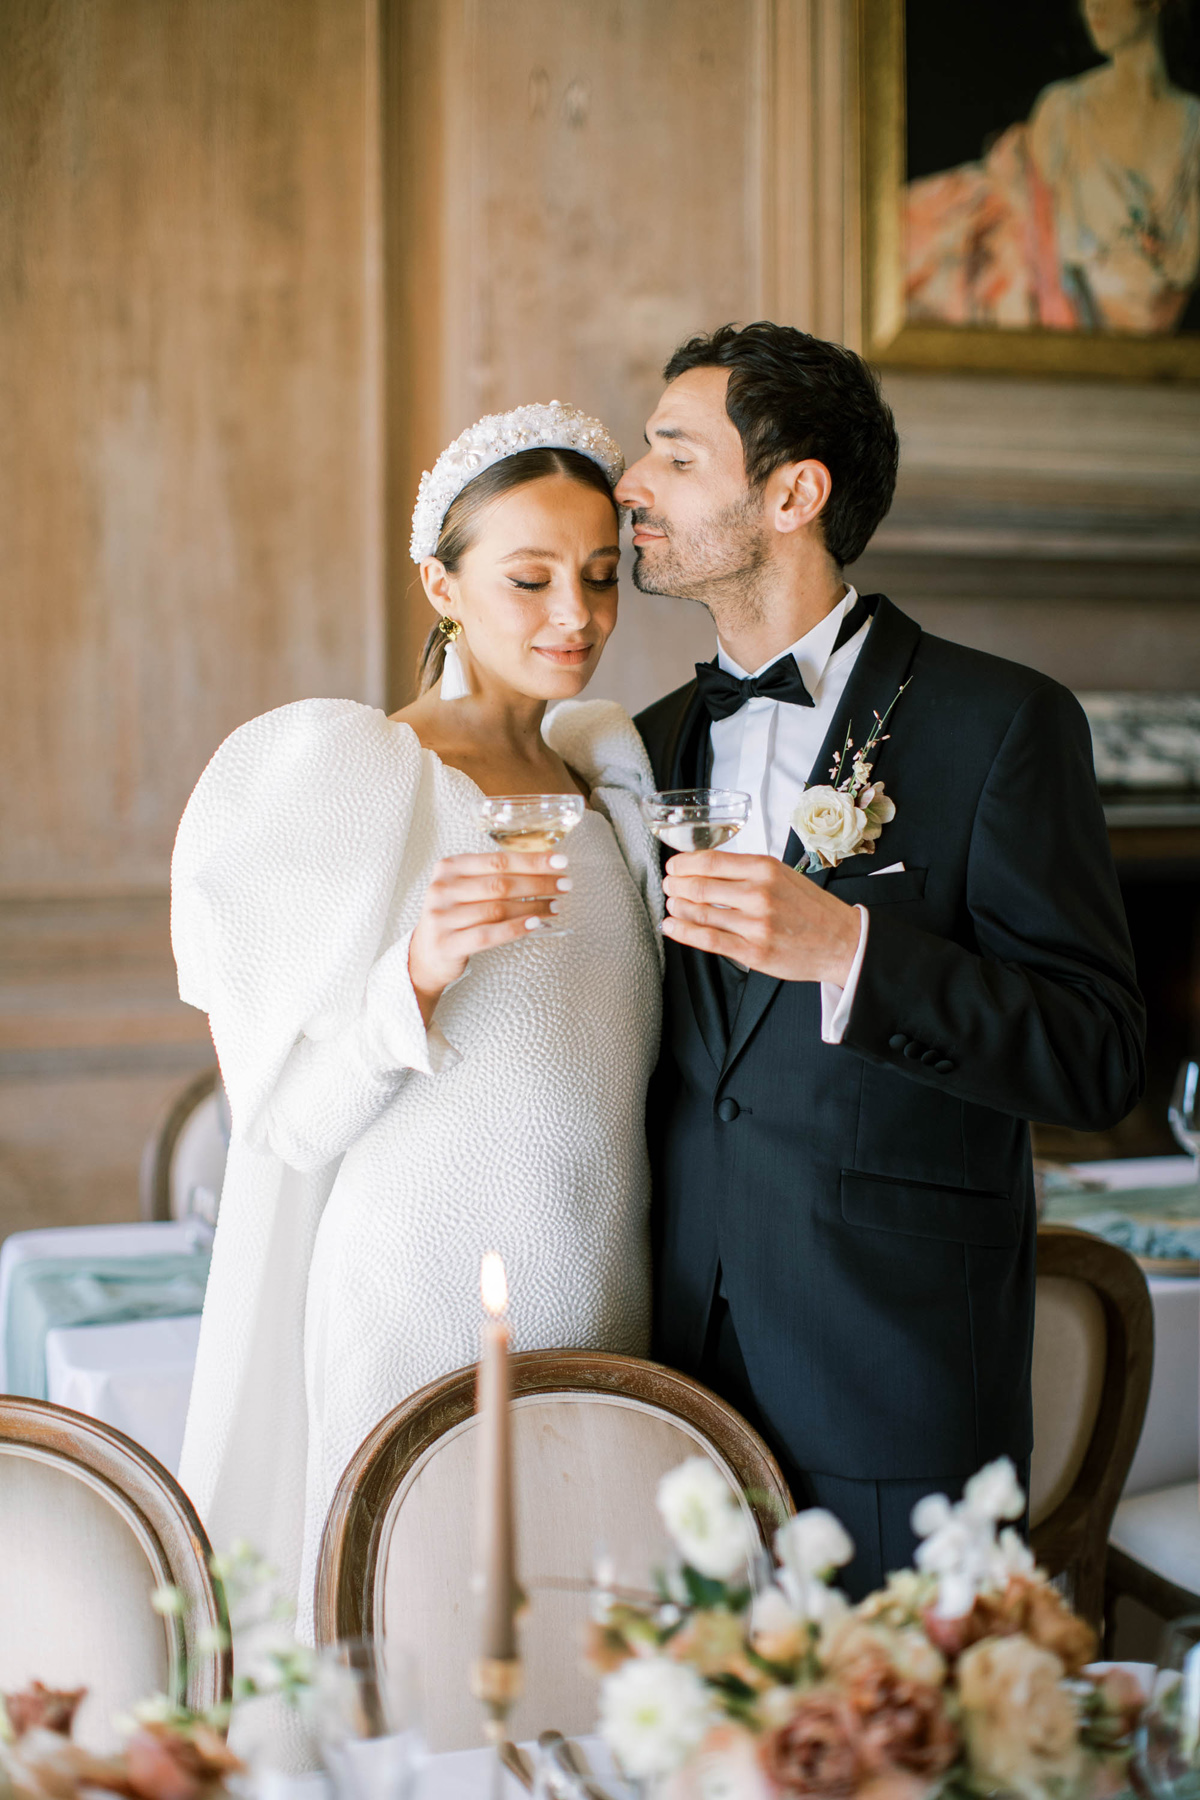 Sophie et Voila Short Puff Sleeve Wedding Dress & Jesus Peiro Bridal Separates at Findon Place in Sussex | Love My Dress®